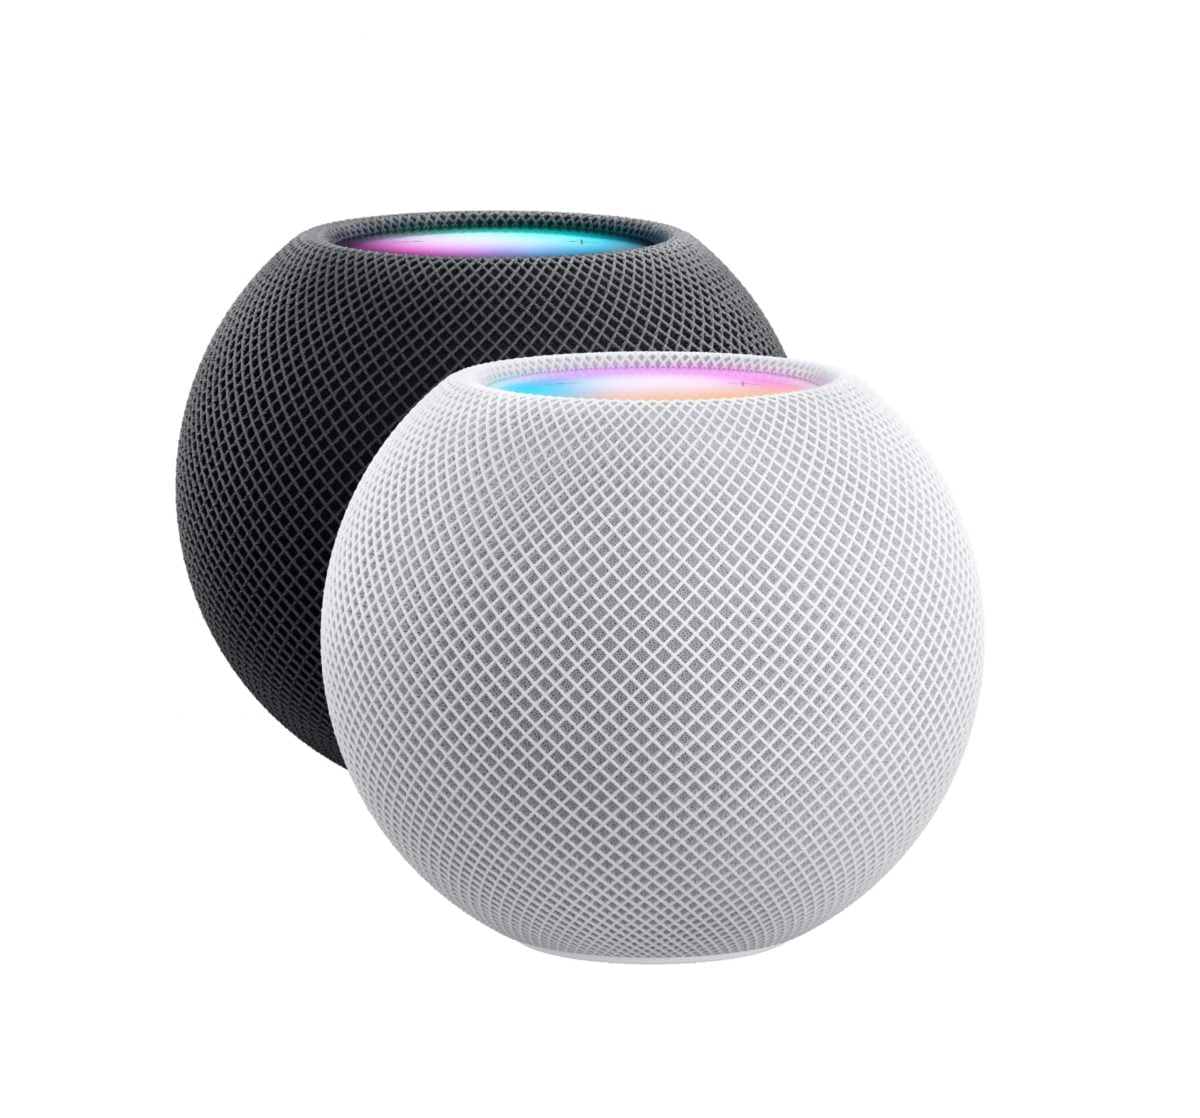 6377590Cv11D Scaled Apple &Lt;H1&Gt;Apple Homepod Mini White&Lt;/H1&Gt; Jam-Packed With Innovation, Homepod Mini Fills The Entire Room With Rich 360-Degree Audio. Place Multiple Speakers Around The House For A Connected Sound System. And With Siri, Your Favorite Do-It-All Intelligent Assistant Helps With Everyday Tasks And Controls Your Smart Home Privately And Securely. &Lt;H2&Gt;Features:&Lt;/H2&Gt; - Fills The Entire Room With Rich 360-Degree Audio - Siri Is Your Do-It-All Intelligent Assistant, Helping With Everyday Tasks - Easily Control Your Smart Home - Designed To Keep Your Data Private And Secure - Place Multiple Homepod Mini Speakers Around The House For A Connected Sound System² - Intercom Messages To Every Room³ - Pair Two Homepod Mini Speakers Together For Immersive Stereo Sound - Voice Recognition Gives Each Family Member A Personalized Experience⁴ - Seamlessly Hand-Off Audio By Bringing Your Iphone Close To Homepod Setup Requires Wi-Fi And Iphone, Ipad, Or Ipod Touch With The Latest Software. &Lt;Pre&Gt;One Year International Apple Warranty&Lt;/Pre&Gt; Homepod Mini Apple Homepod Mini White